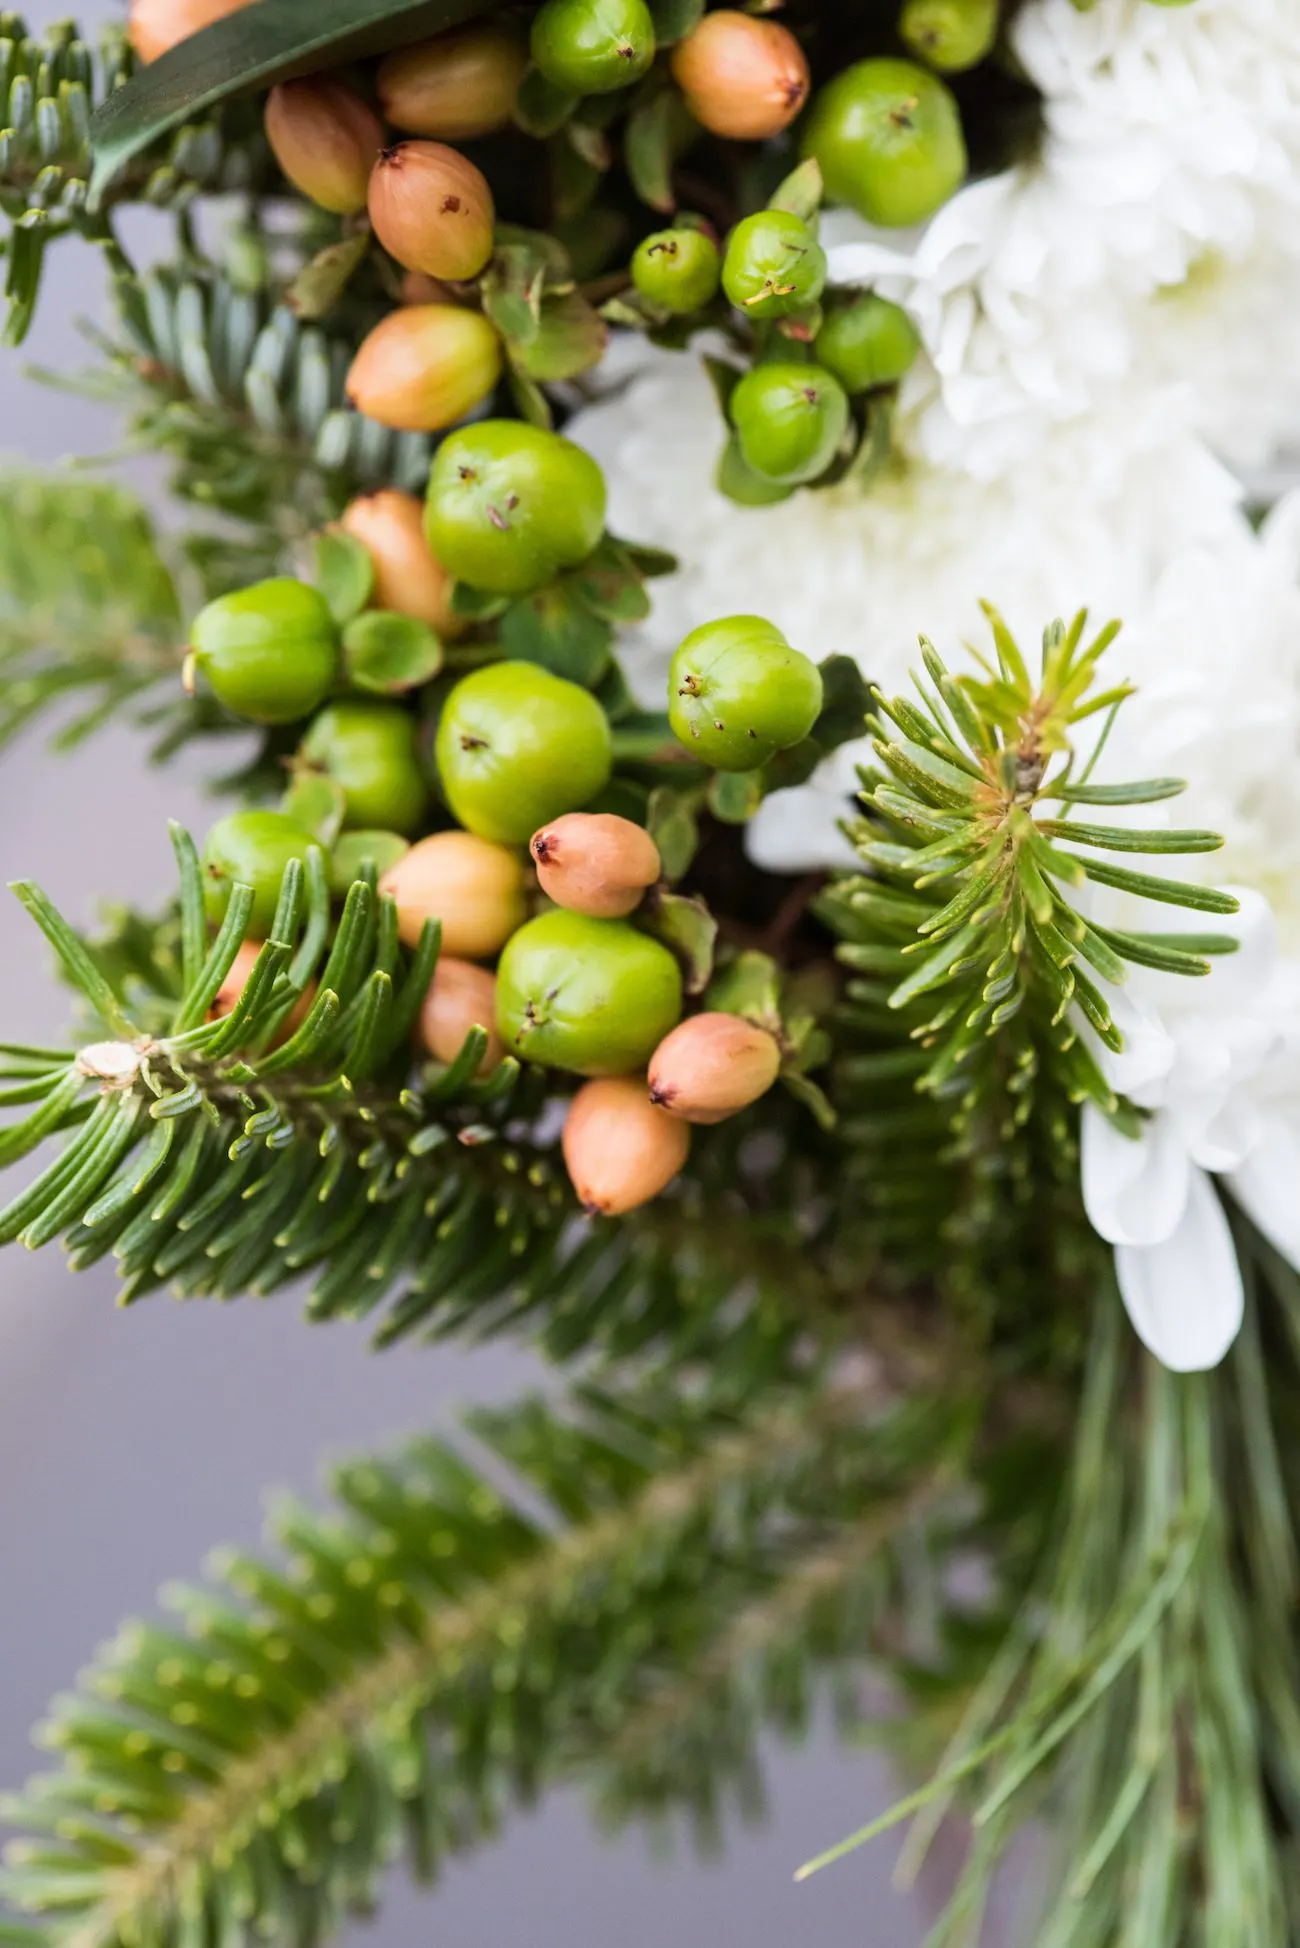 DIY Natural Winter Wreath | Homemade Christmas decor, entertaining tips, party ideas and winter decorating ideas from @cydconverse